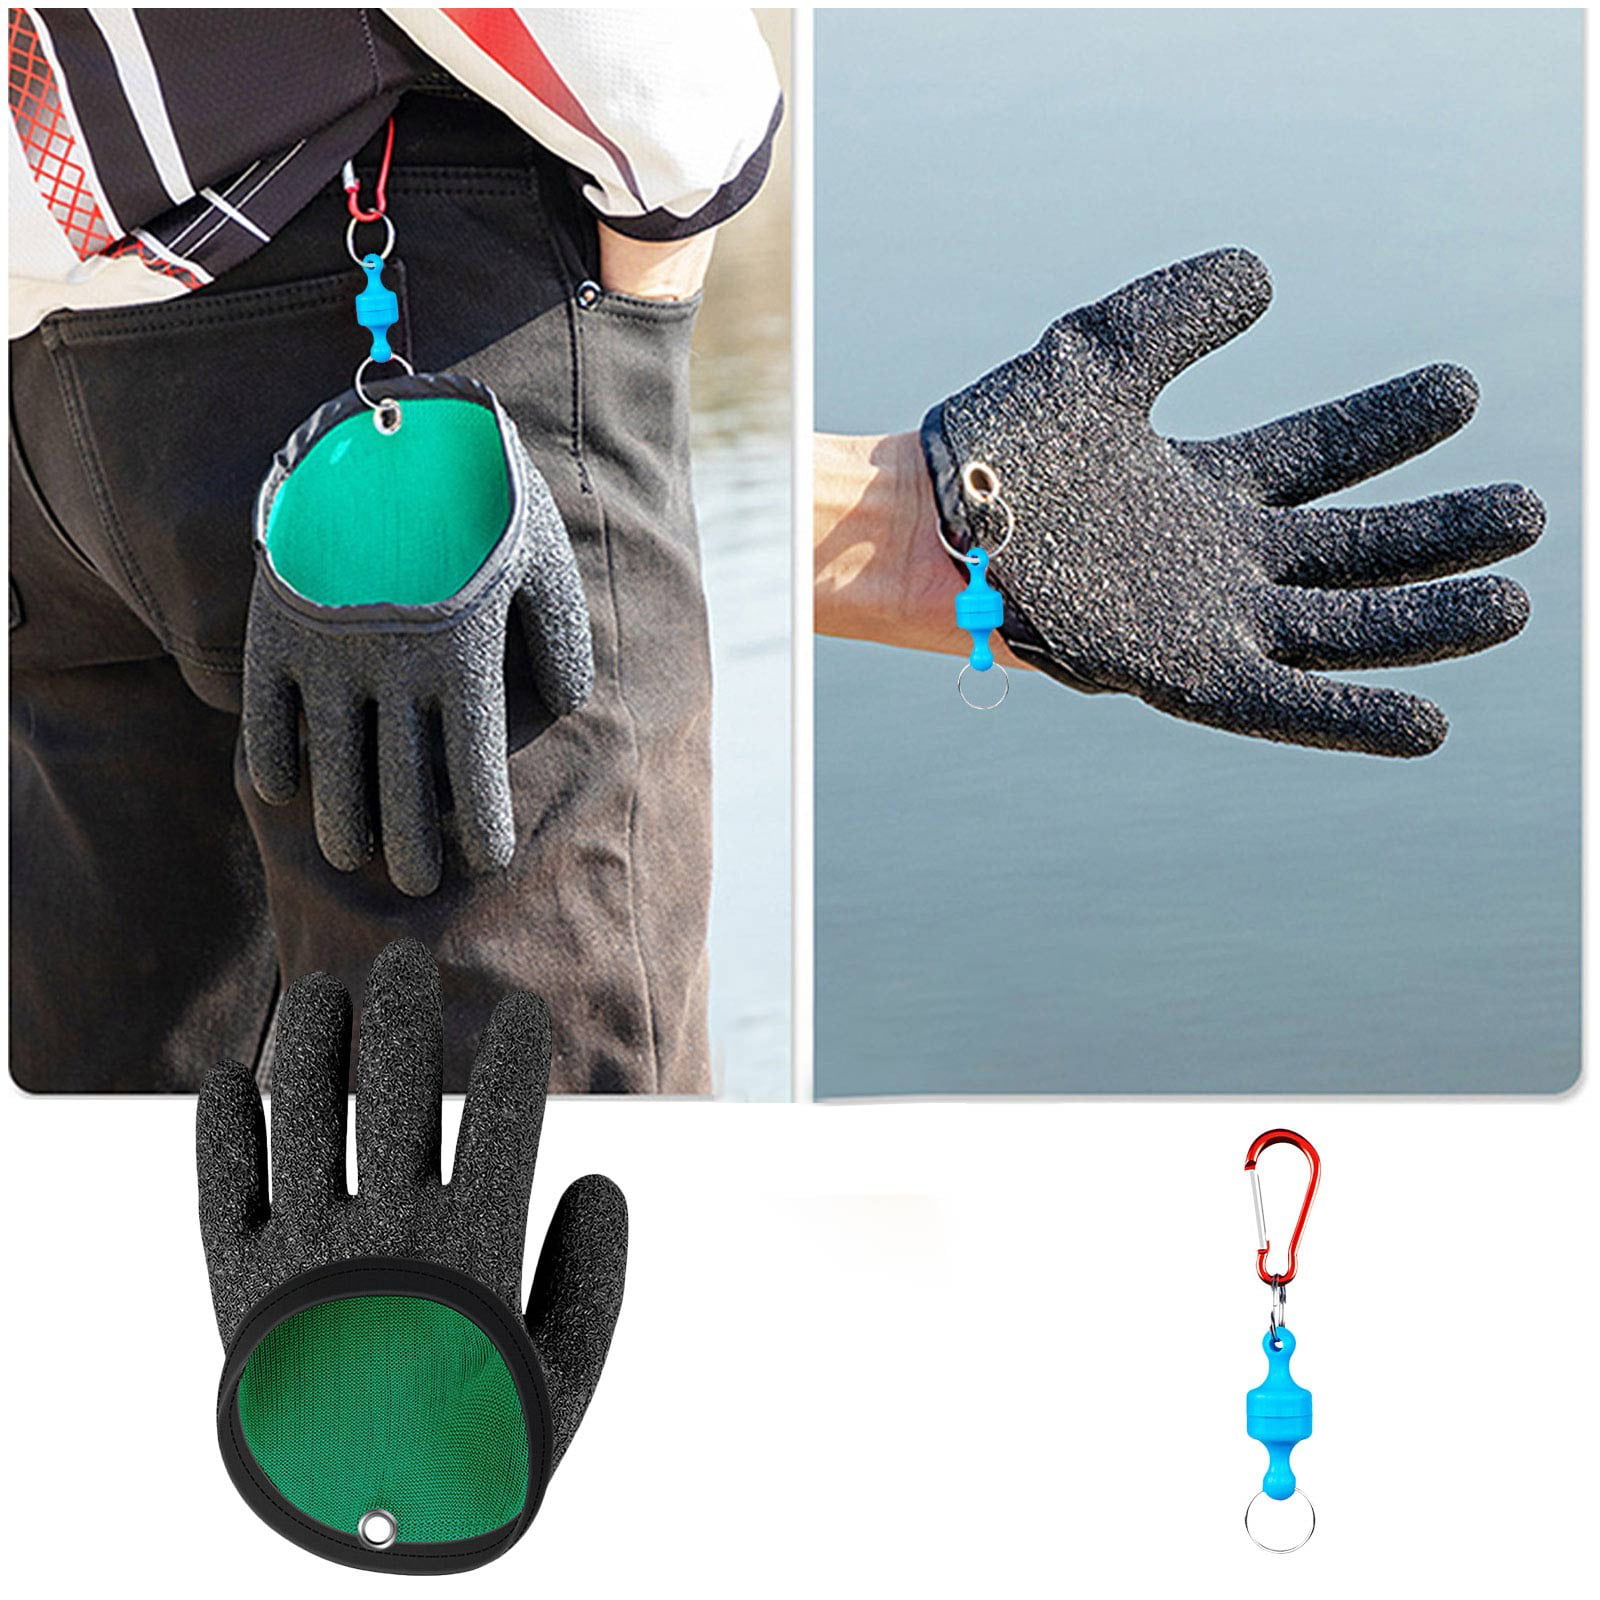 KIHOUT Fire Sale Stab-proof, Magnetic Fishing Gloves